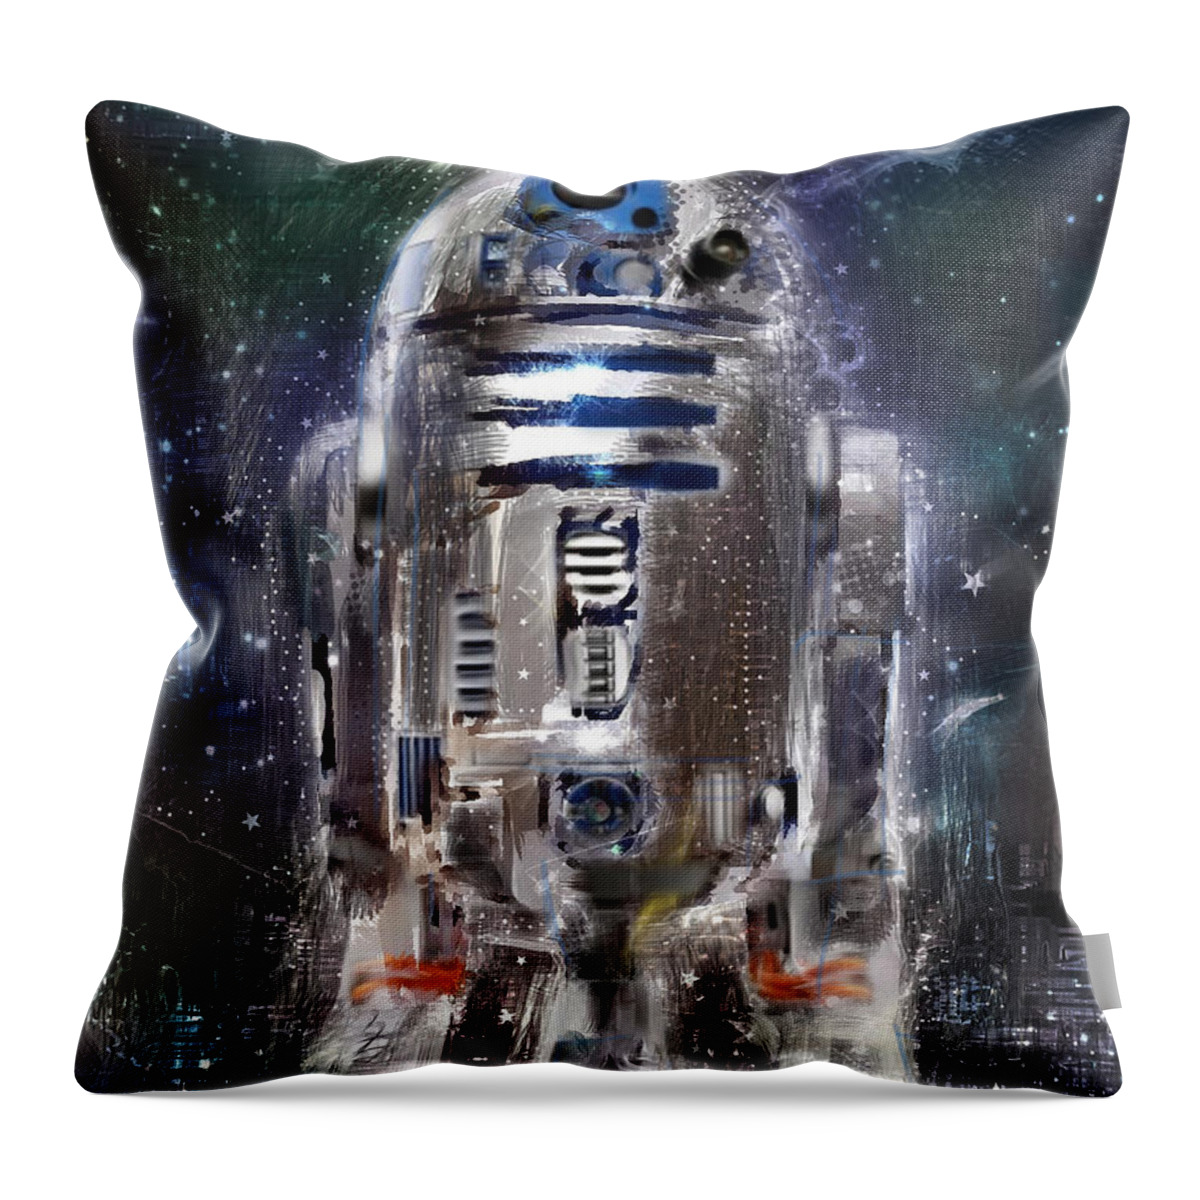 R2d2 Throw Pillow featuring the digital art The Little Guy by Russell Pierce